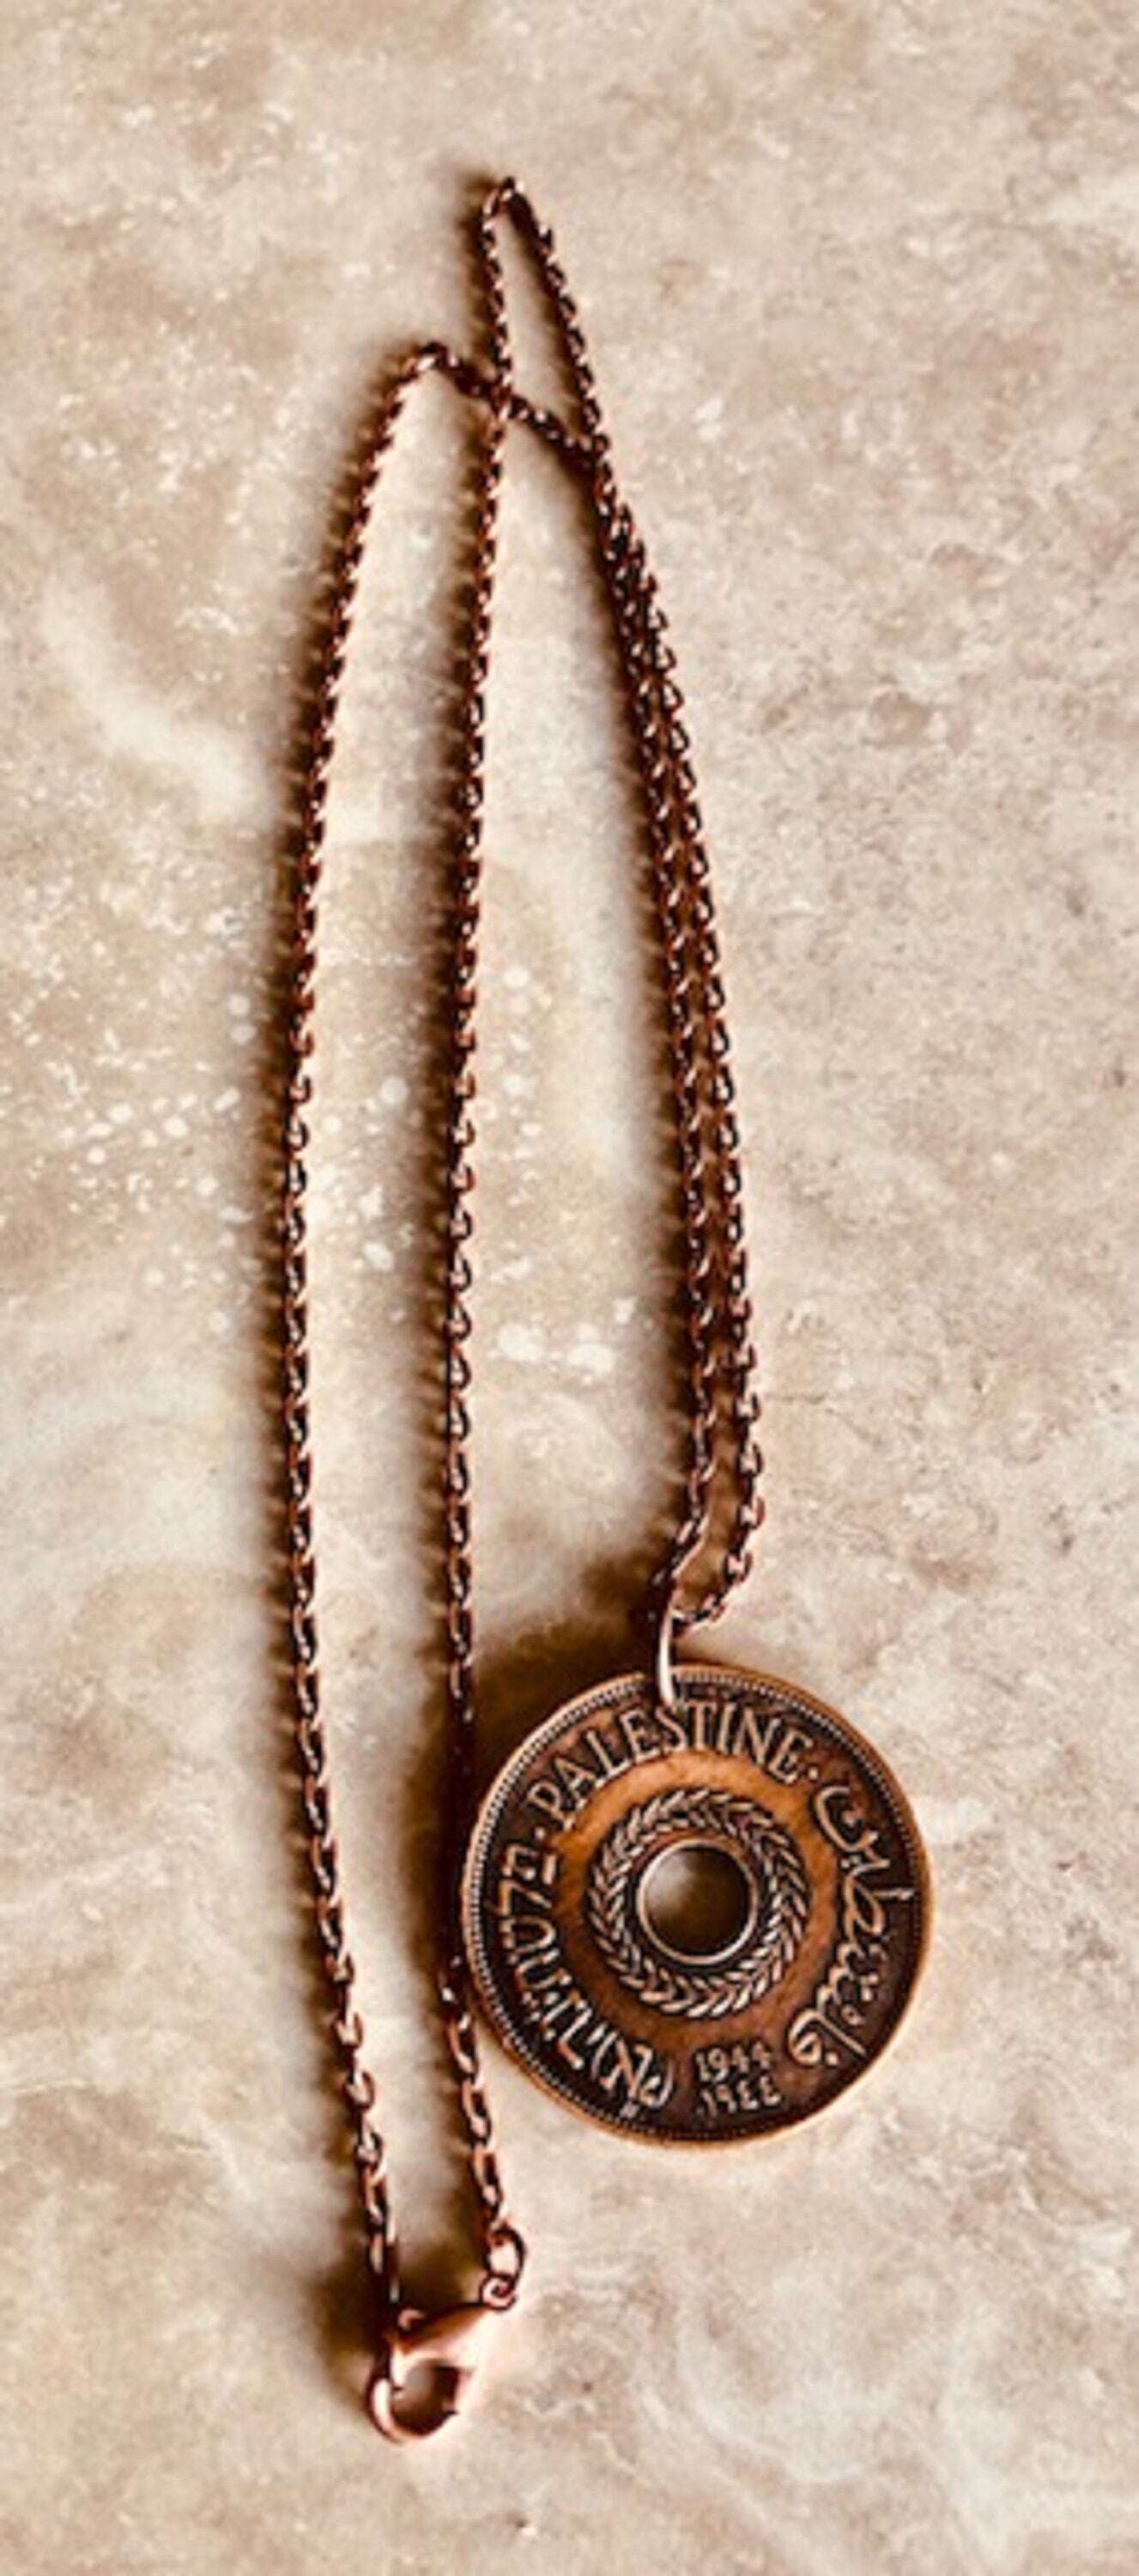 Palestine Coin Necklace Pendant 20 Mils Jewelry Vintage Custom Made Rare coins - Coin Enthusiast - Handmade - Fashion Jewelry